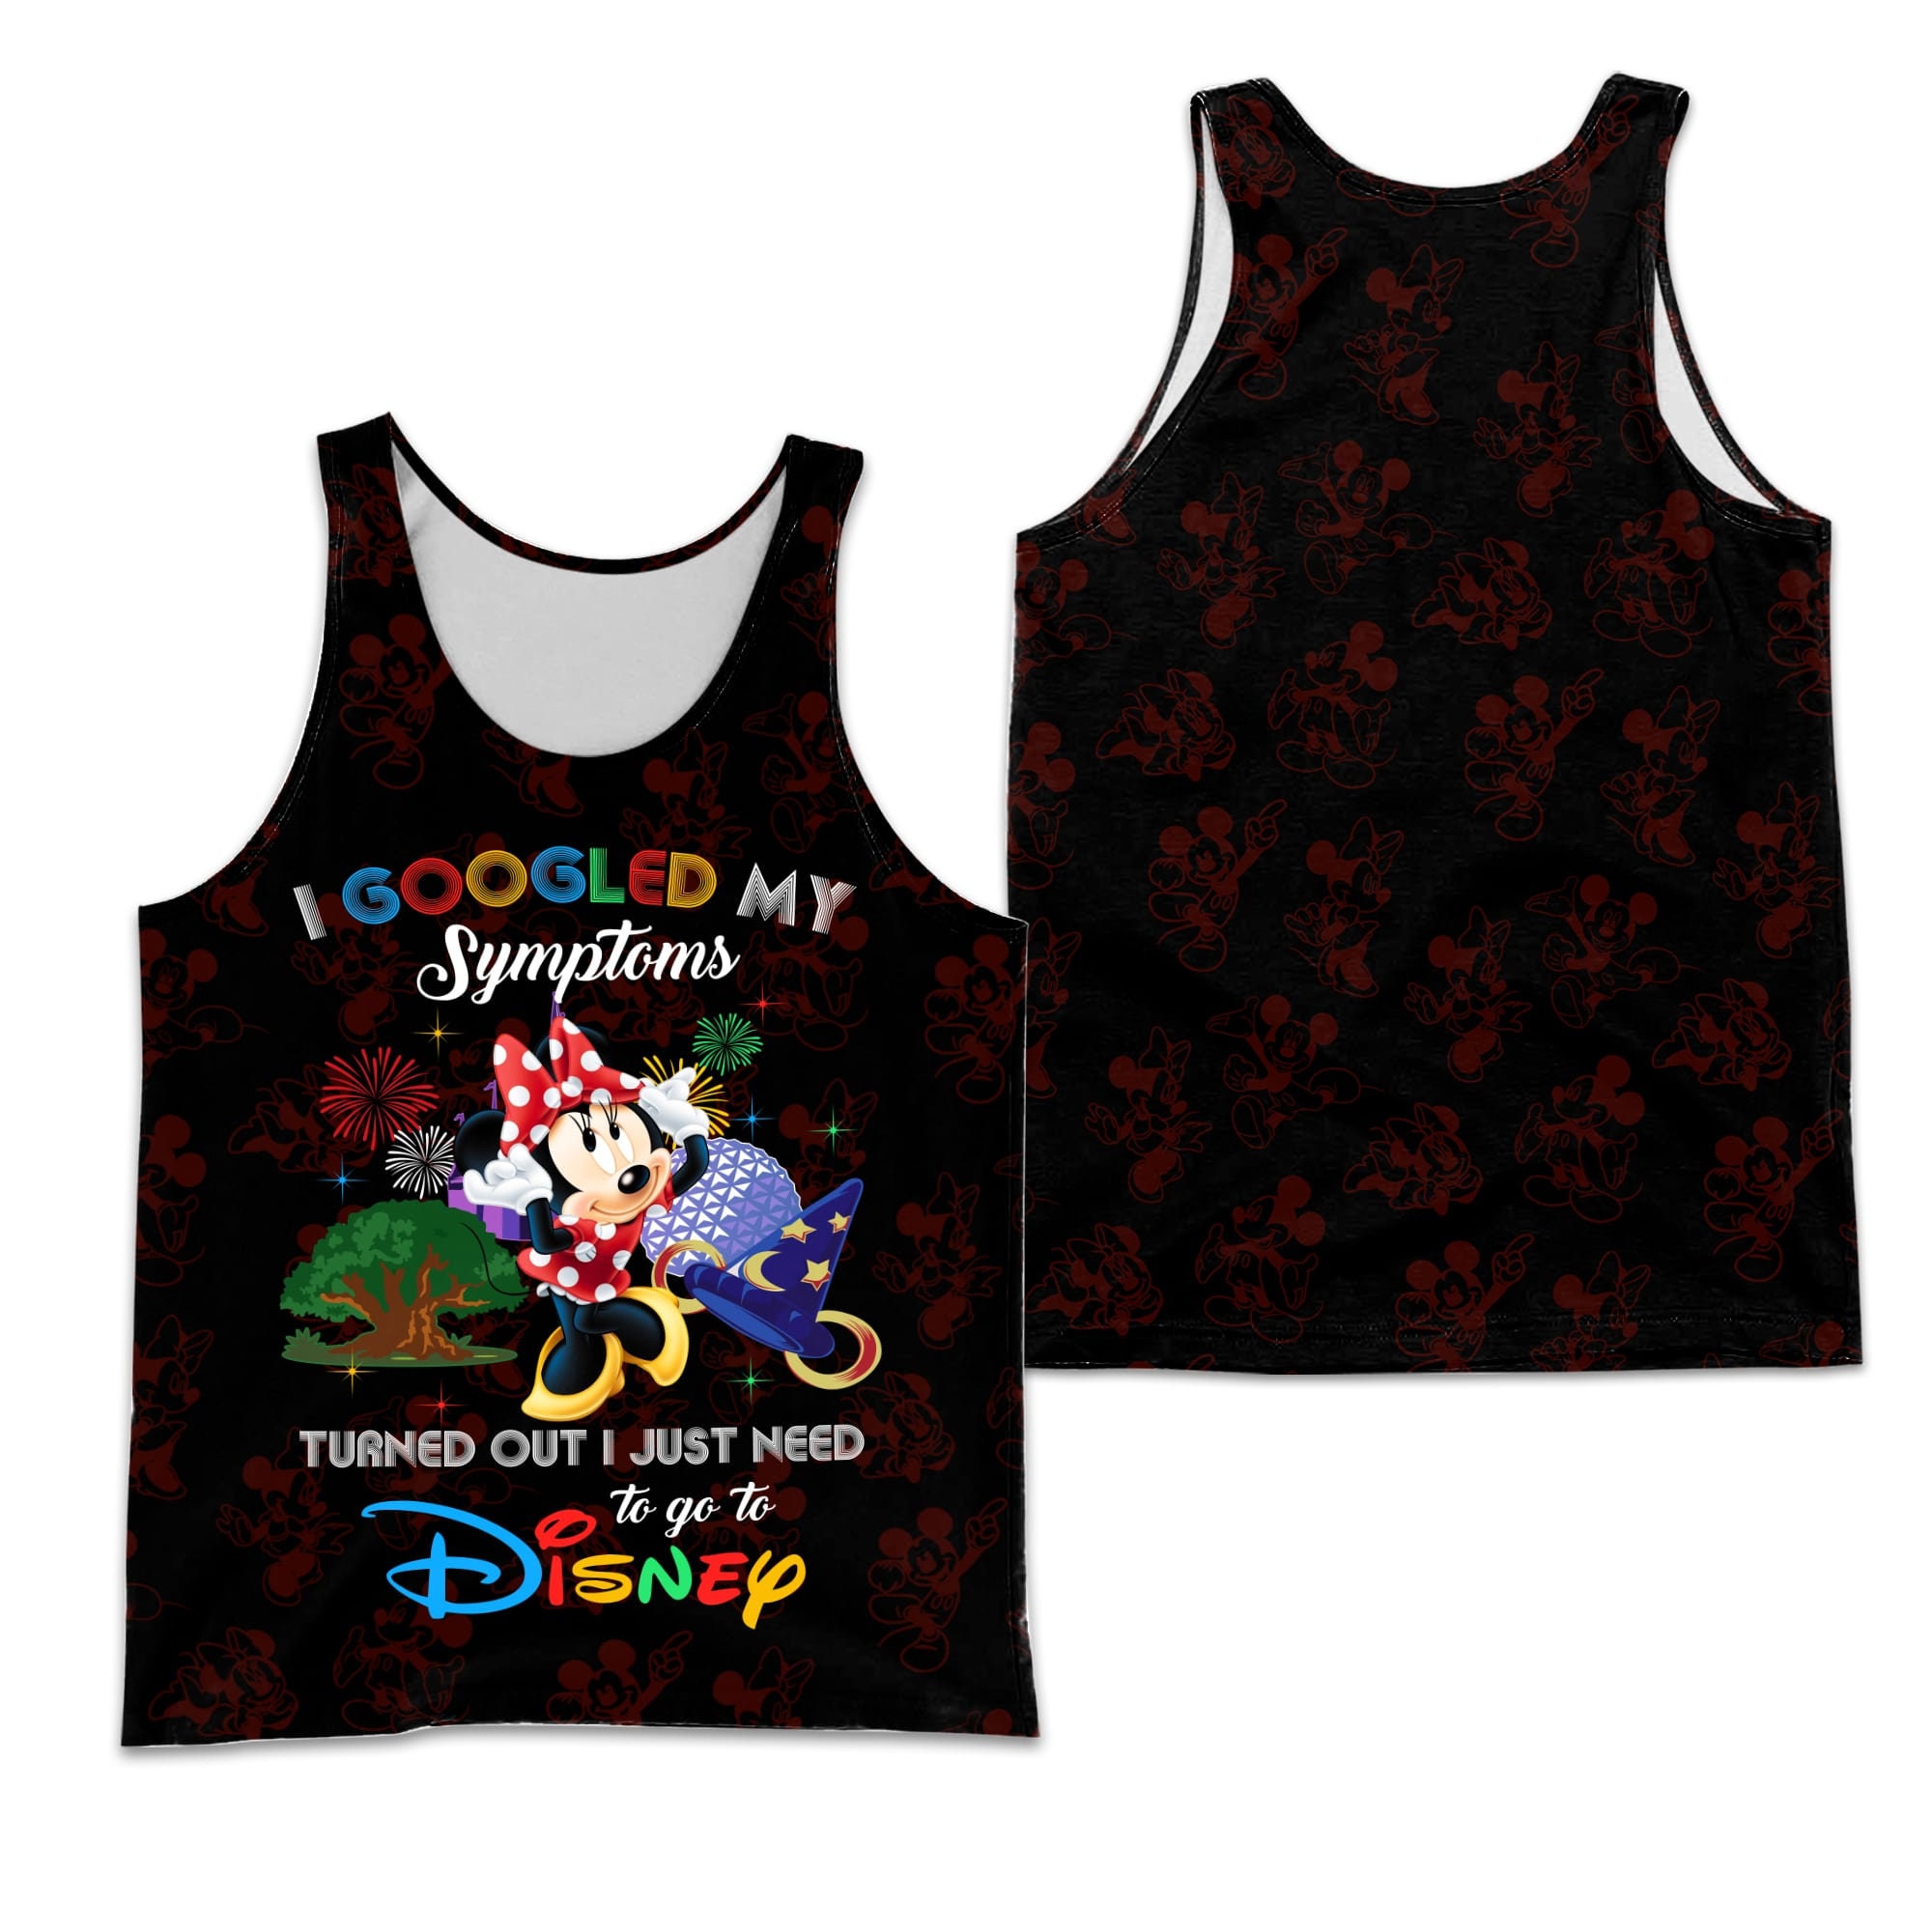 Discover Minnie Mouse Google Funny Quote Black Disney Cartoon Graphic Summer Vacation Tanktop